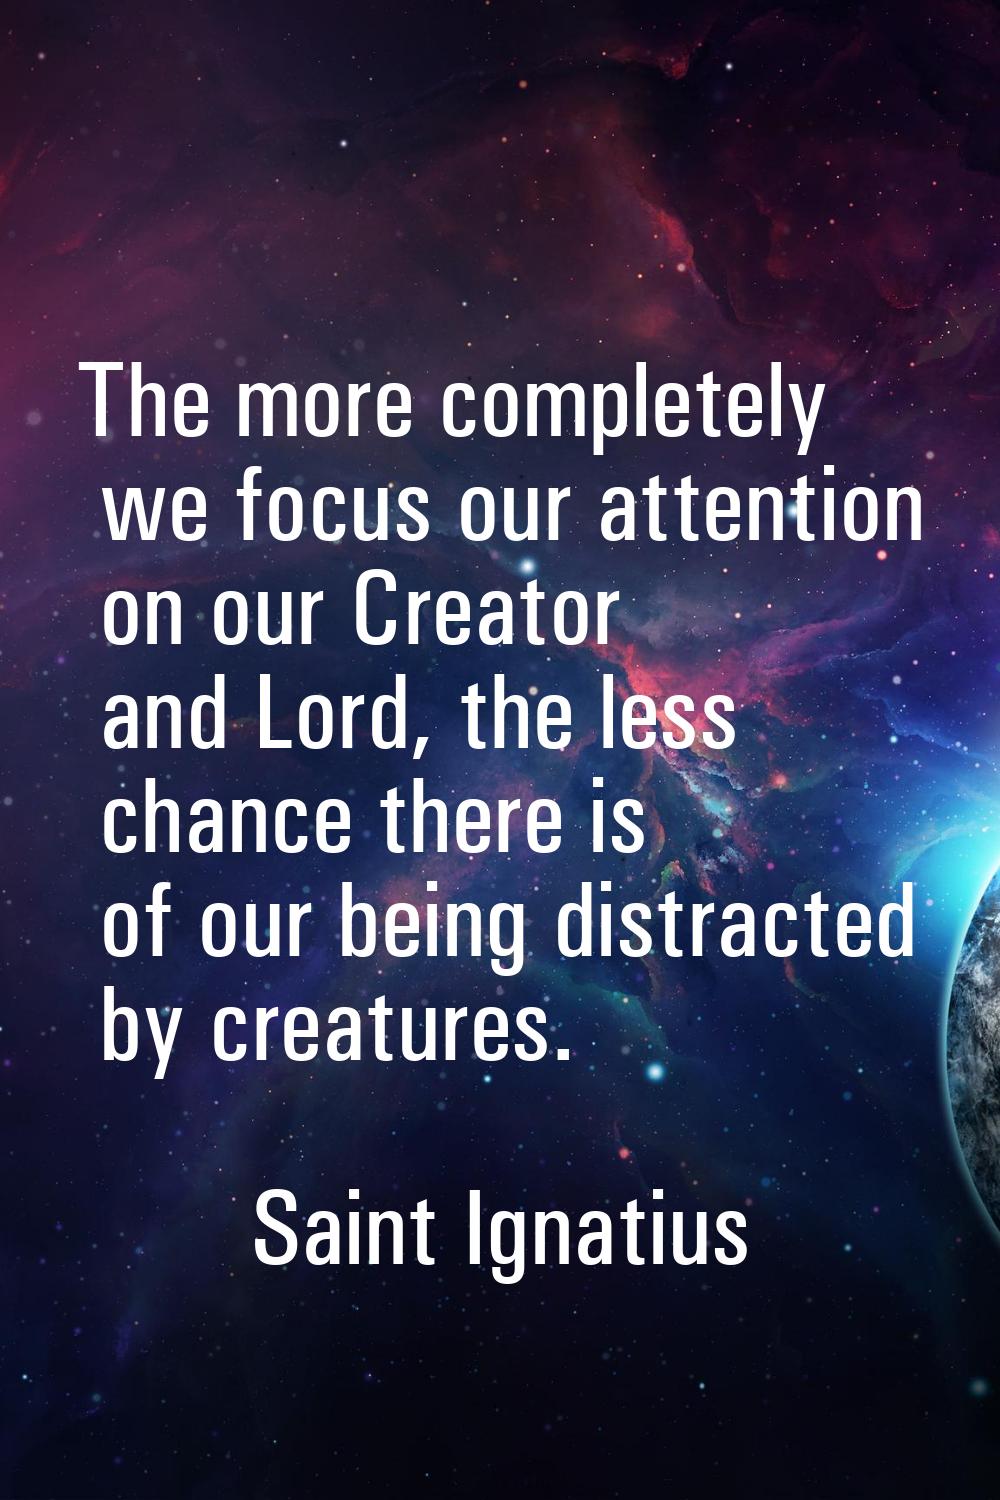 The more completely we focus our attention on our Creator and Lord, the less chance there is of our